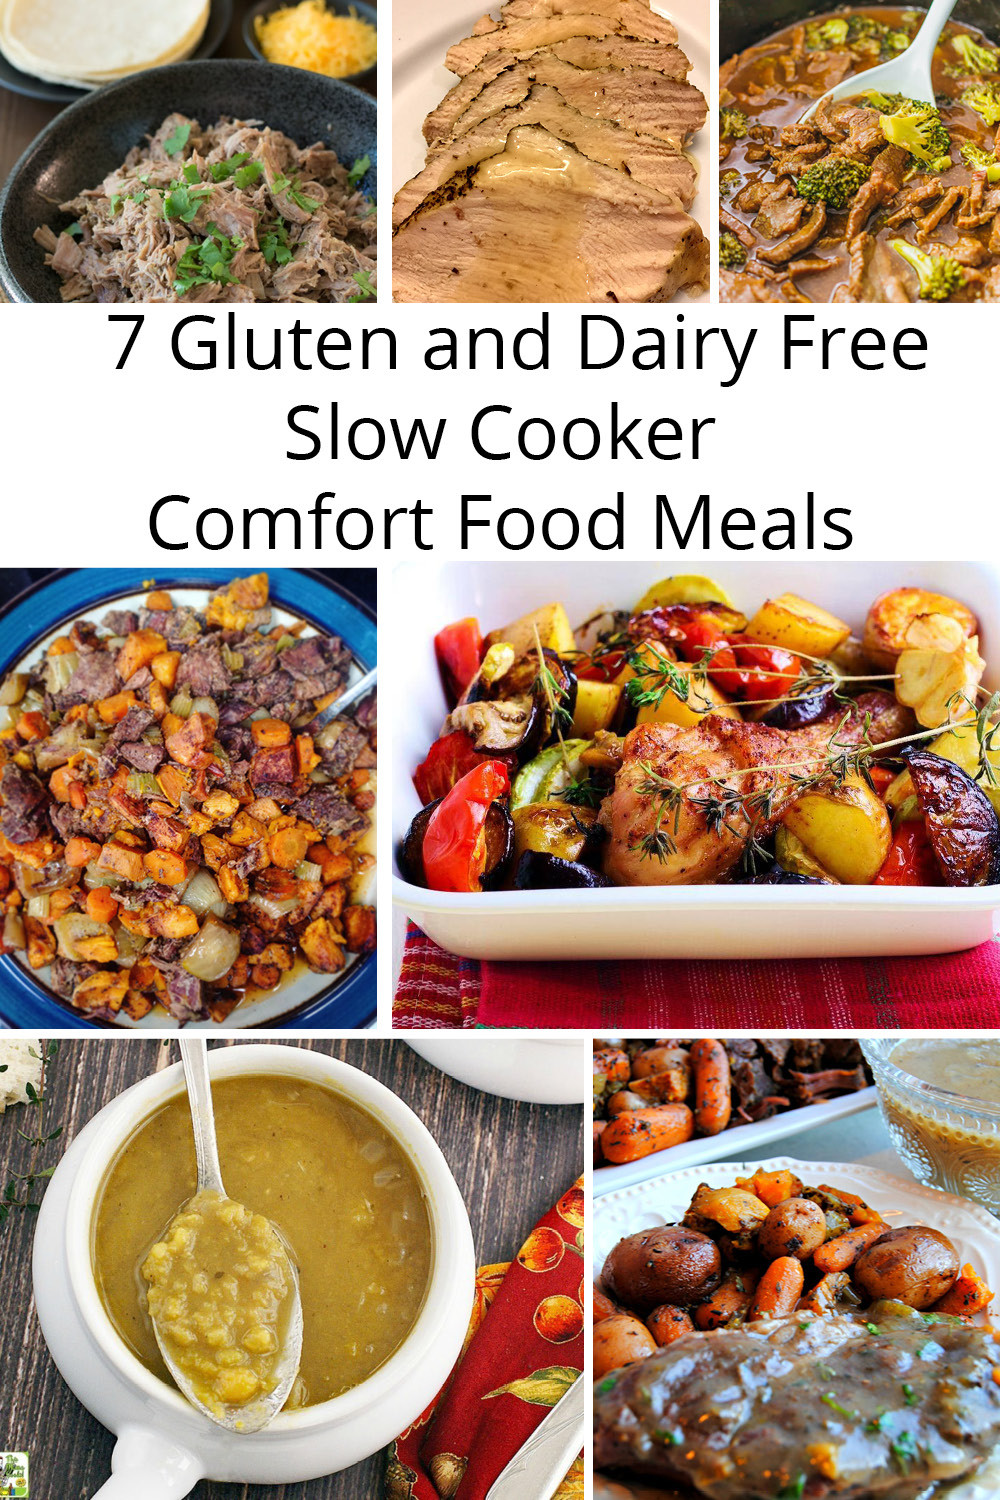 Gluten Free Dairy Free Slow Cooker Recipes
 7 Gluten and Dairy Free Slow Cooker fort Food Meals